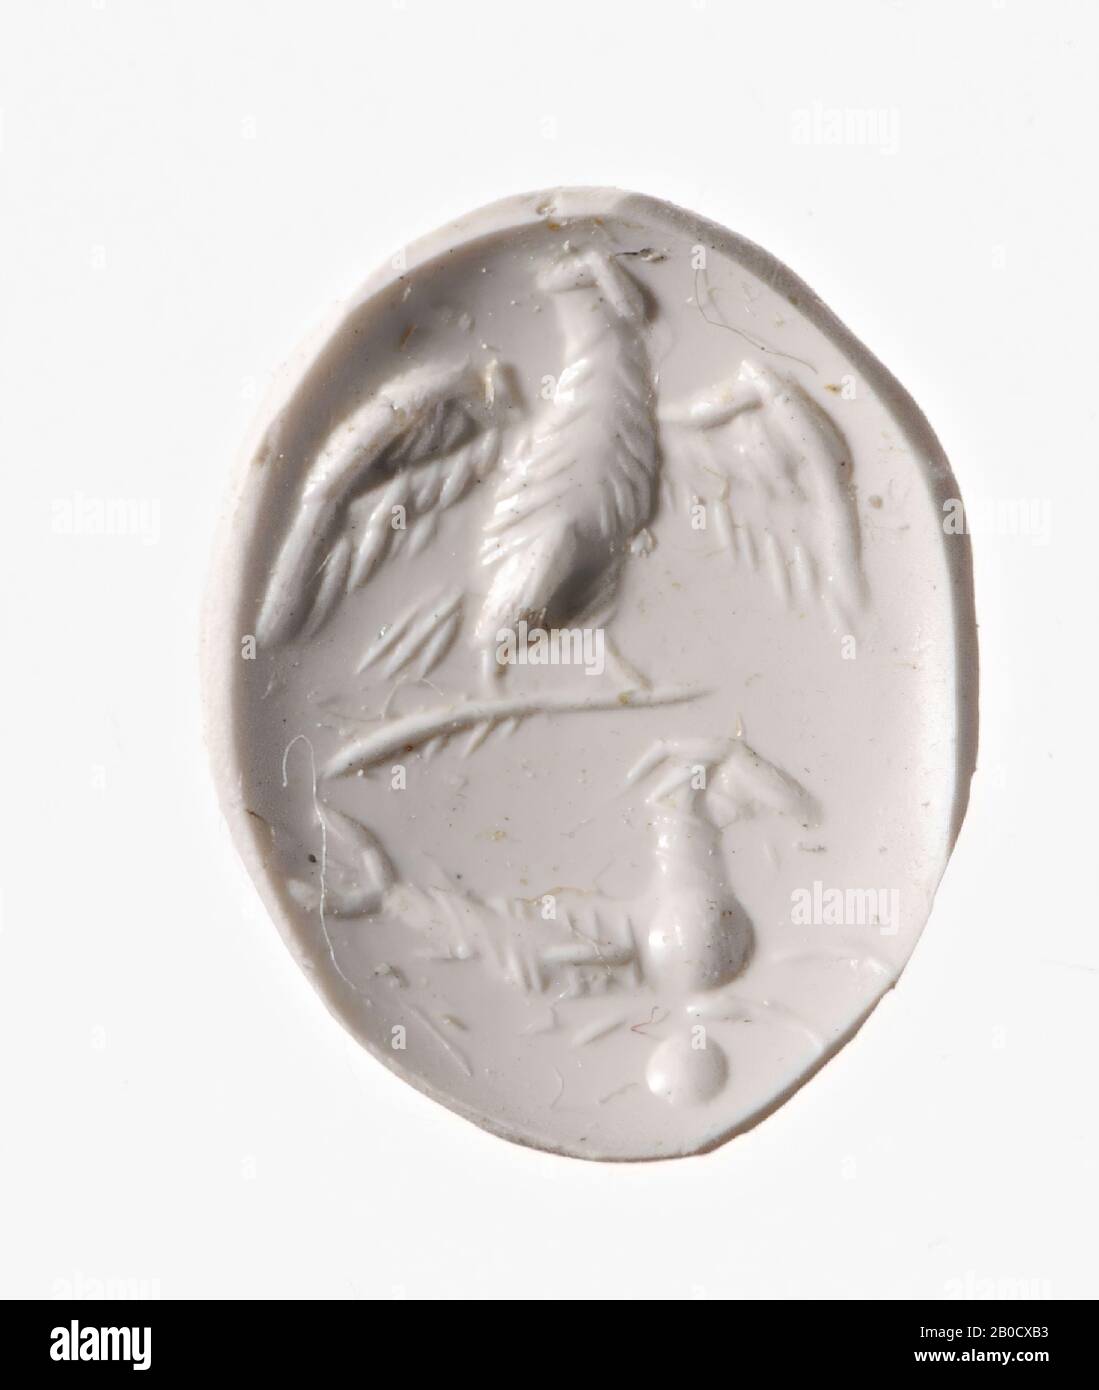 Vz: eagle on a scepter and a capricorn on a globe., Gem, intaglio, ring stone, agate, Color: with brown top layer, Shape: oval, Machining: front convex, Method: modeling with rounded drill, detailing with thin rounded wheel grooves., 12 x 9.5 mm, D. 3.5 mm, 1st century AD. 1-100 AD Stock Photo